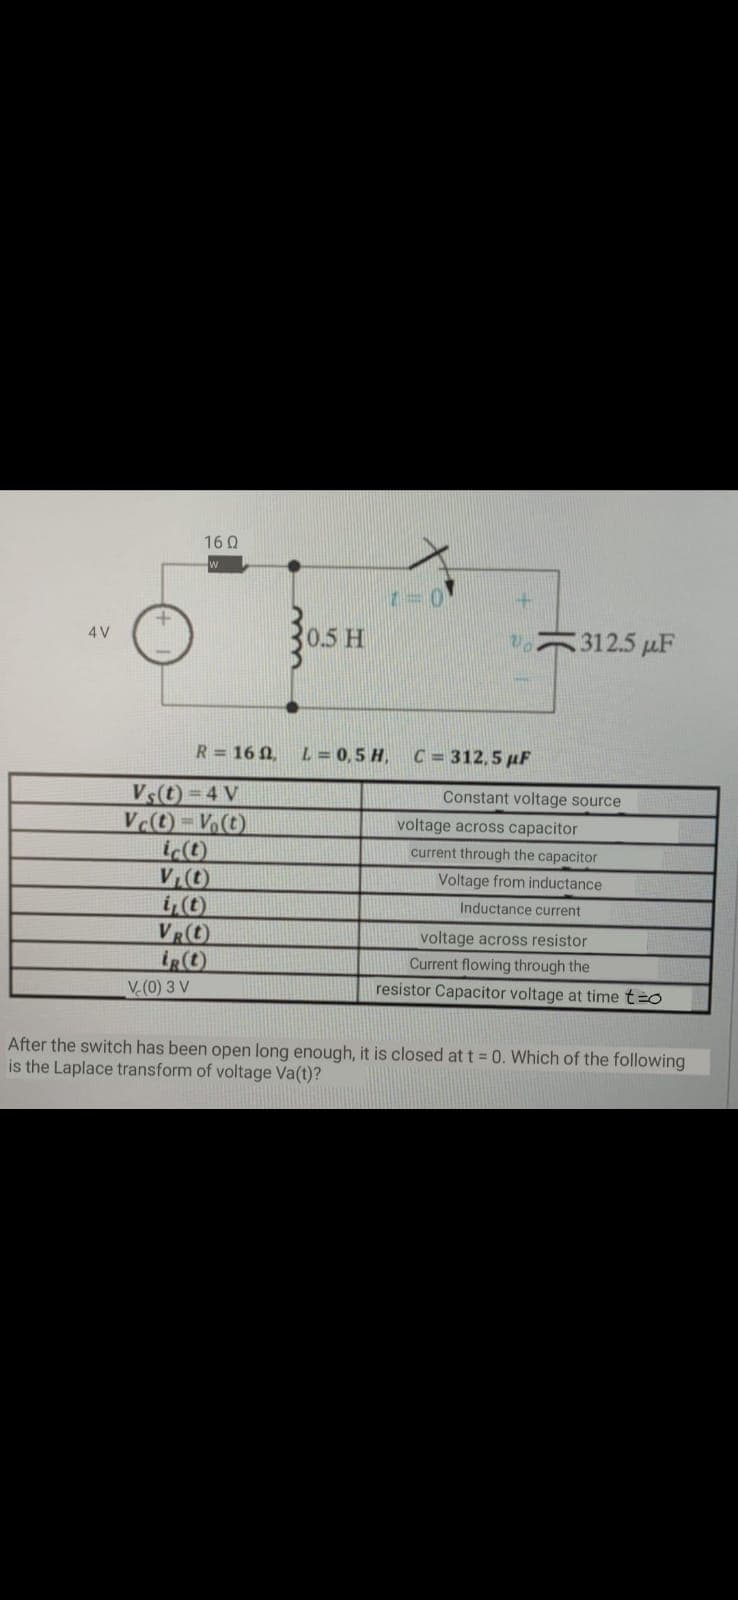 16 Q
w
0.5 H
312.5 µF
4 V
R = 16 ,
L = 0,5 H,
C = 312,5 µF
Vs(t) =4 V
Vct)-V(t)
ic(t)
V(t)
Constant voltage source
voltage across capacitor
current through the capacitor
Voltage from inductance
Inductance current
VR(t)
voltage across resistor
Current flowing through the
V (0) 3 V
resistor Capacitor voltage at time t=o
After the switch has been open long enough, it is closed at t = 0. Which of the following
is the Laplace transform of voltage Va(t)?
